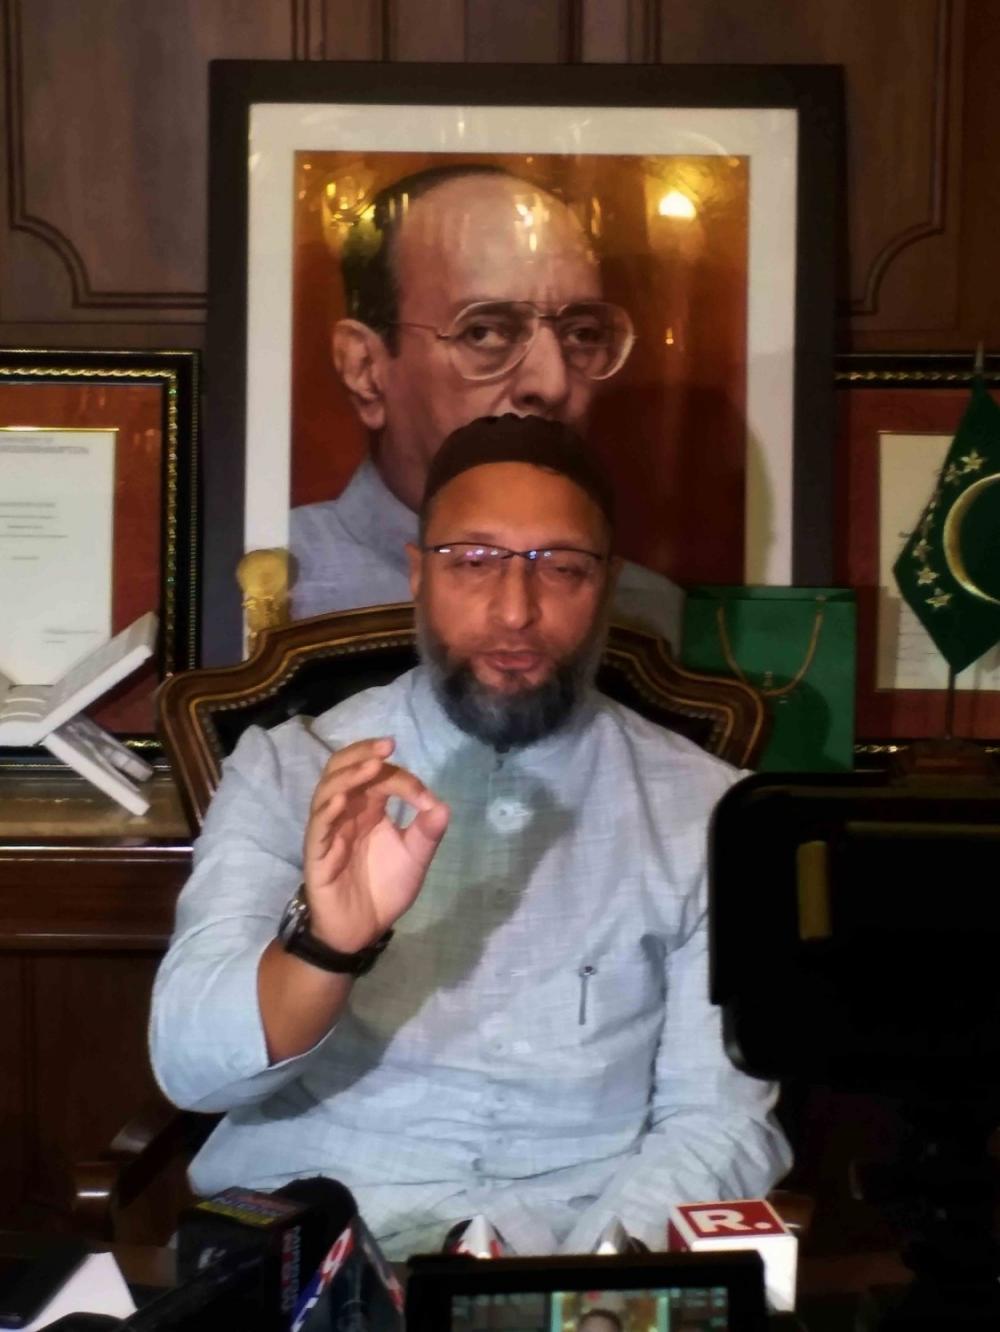 The Weekend Leader - Owaisi dividing society for political gains: BJP